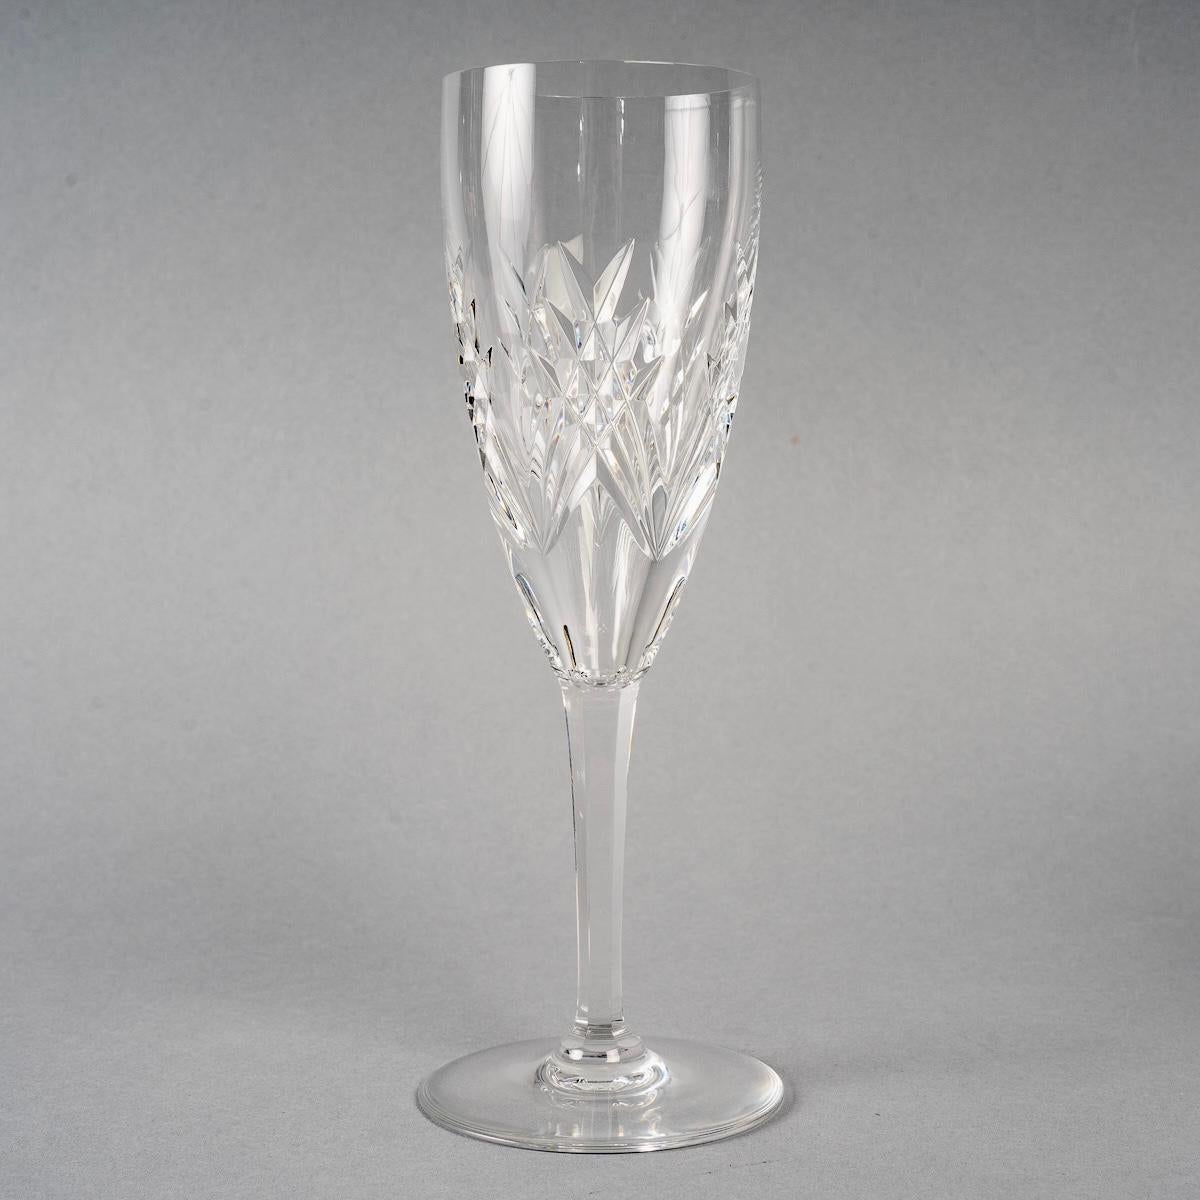 Mid-20th Century 1950 Baccarat, Set of Glasses Auvergne Engraved Crystal, 36 Pieces